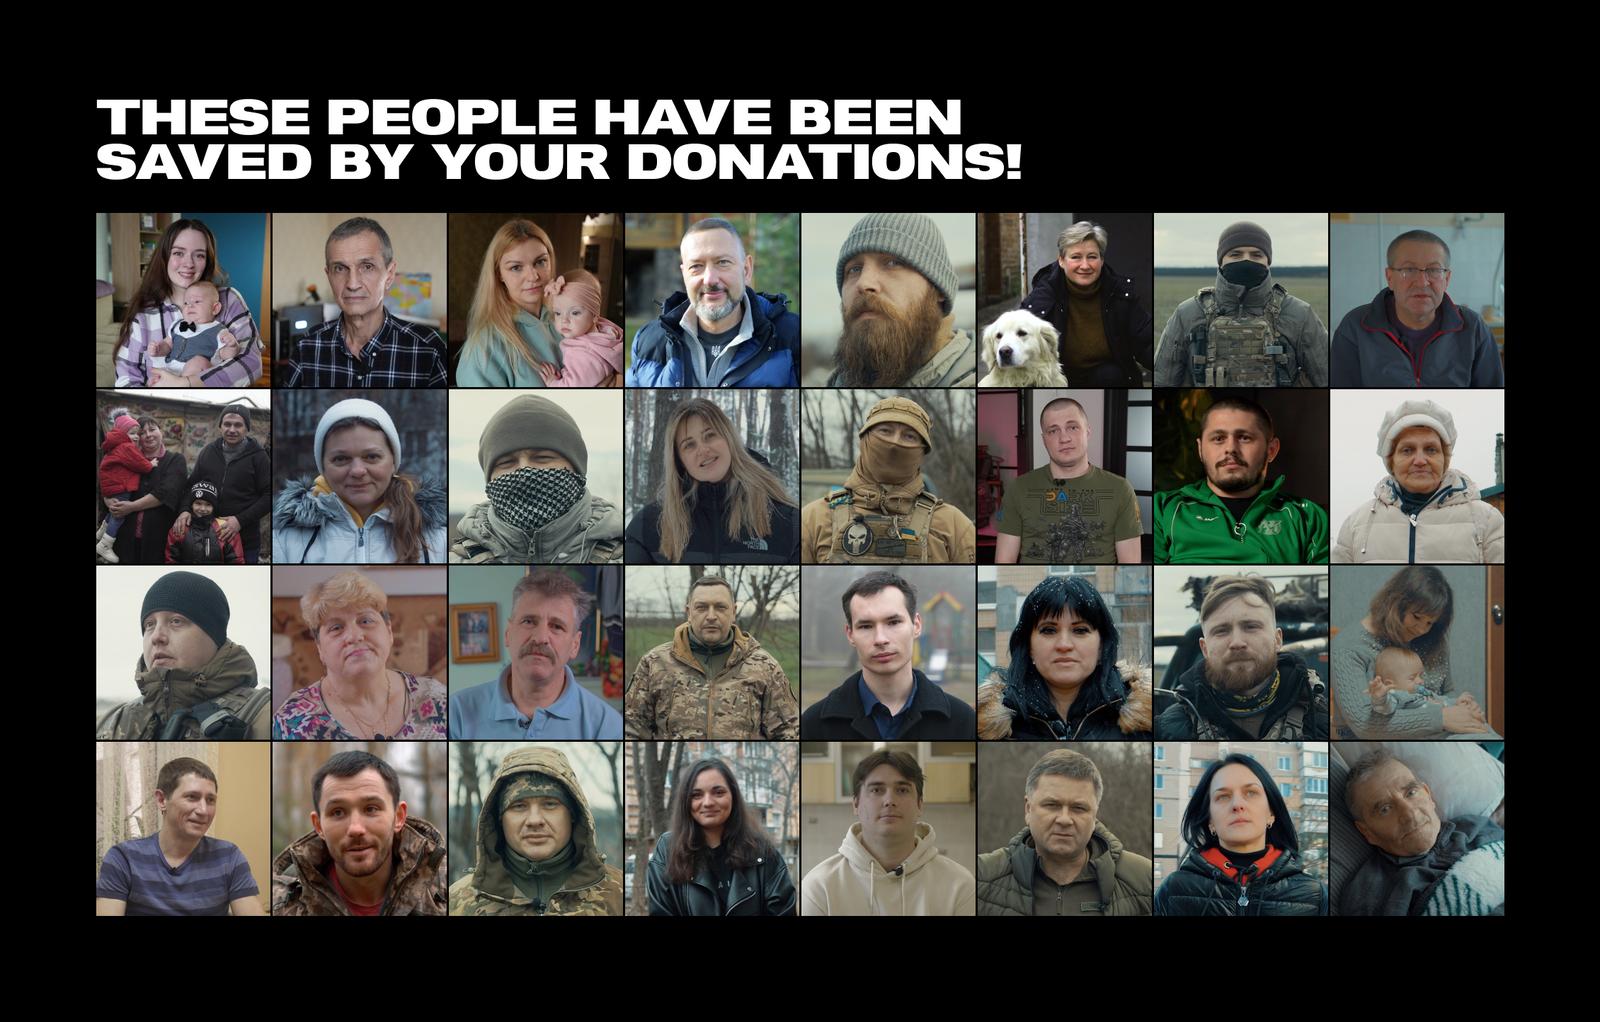 These people have been saved by your donations!